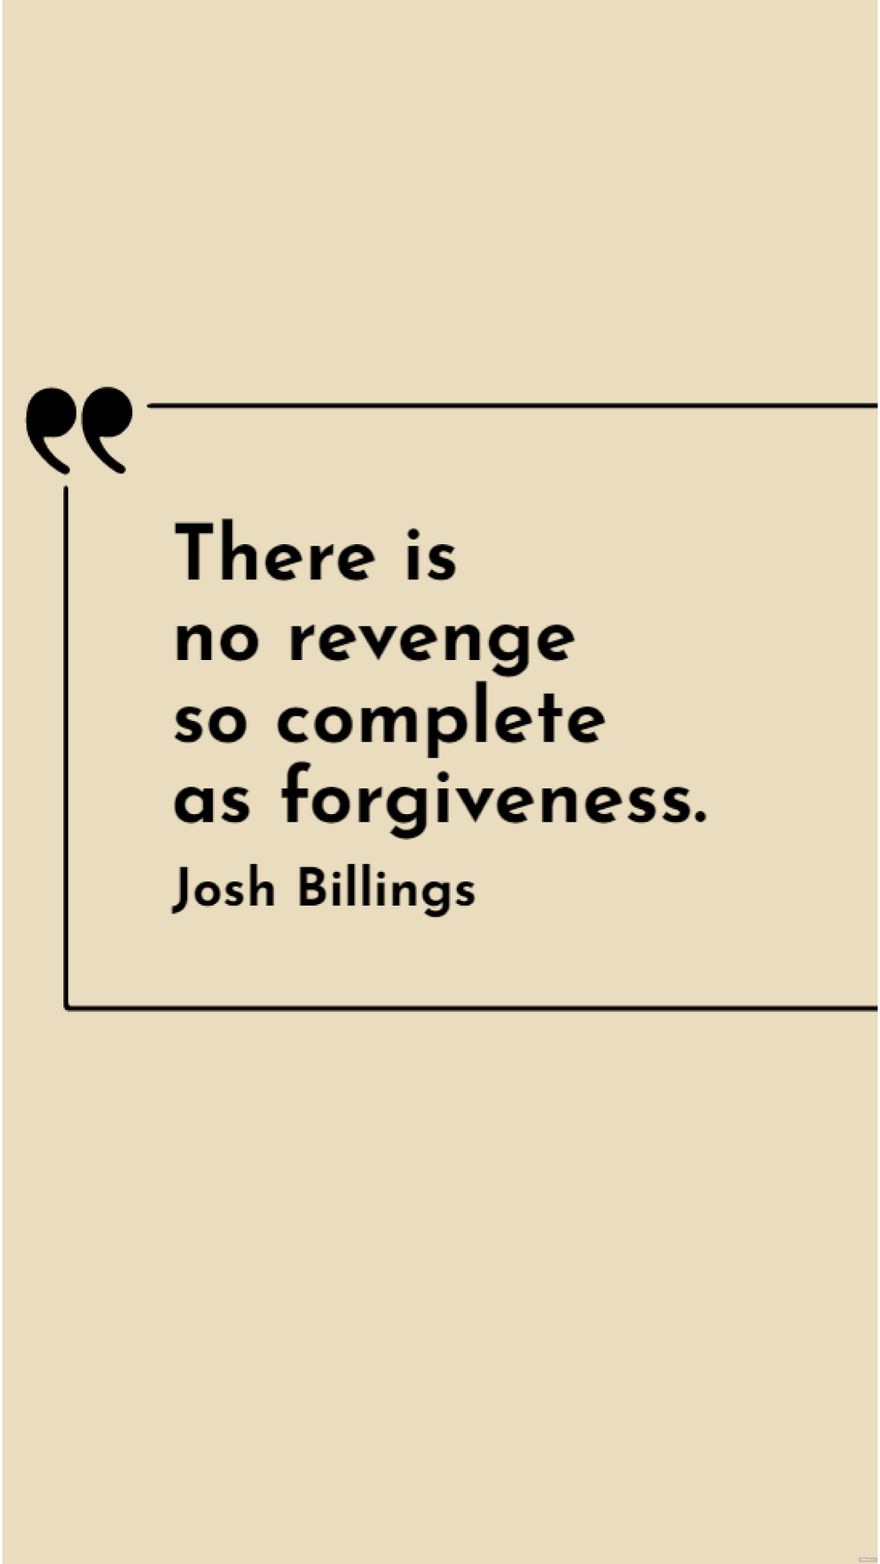 Josh Billings - There is no revenge so complete as forgiveness.